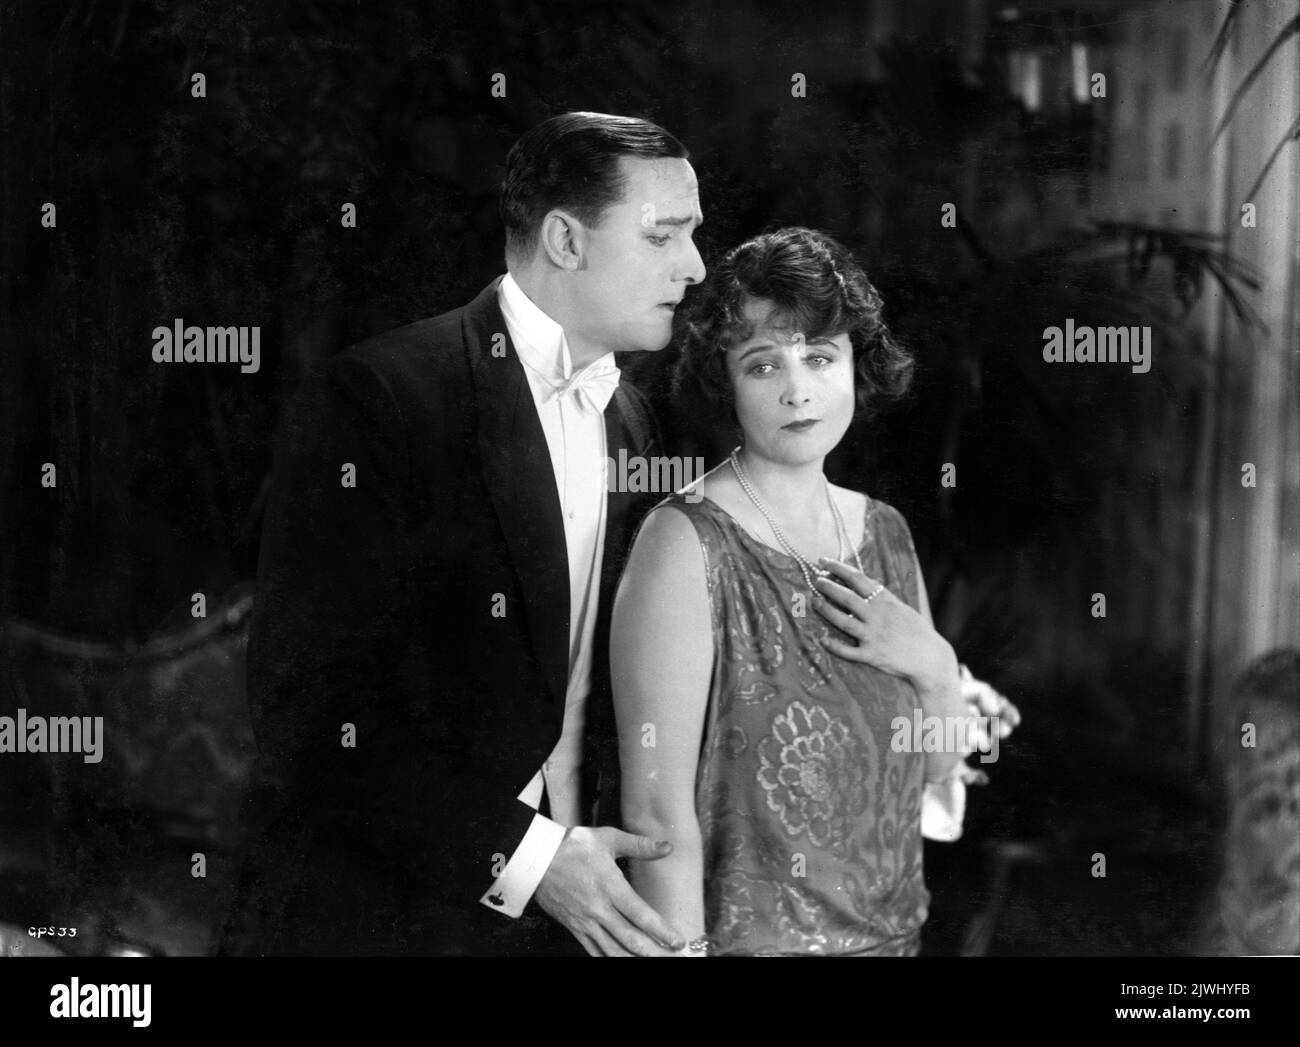 DAVID HAWTHORNE and IVY DUKE  in THE GREAT PRINCE SHAN 1924 director A.E. COLEBY novel E. Phillips Oppenheim Stoll Picture Productions Stock Photo